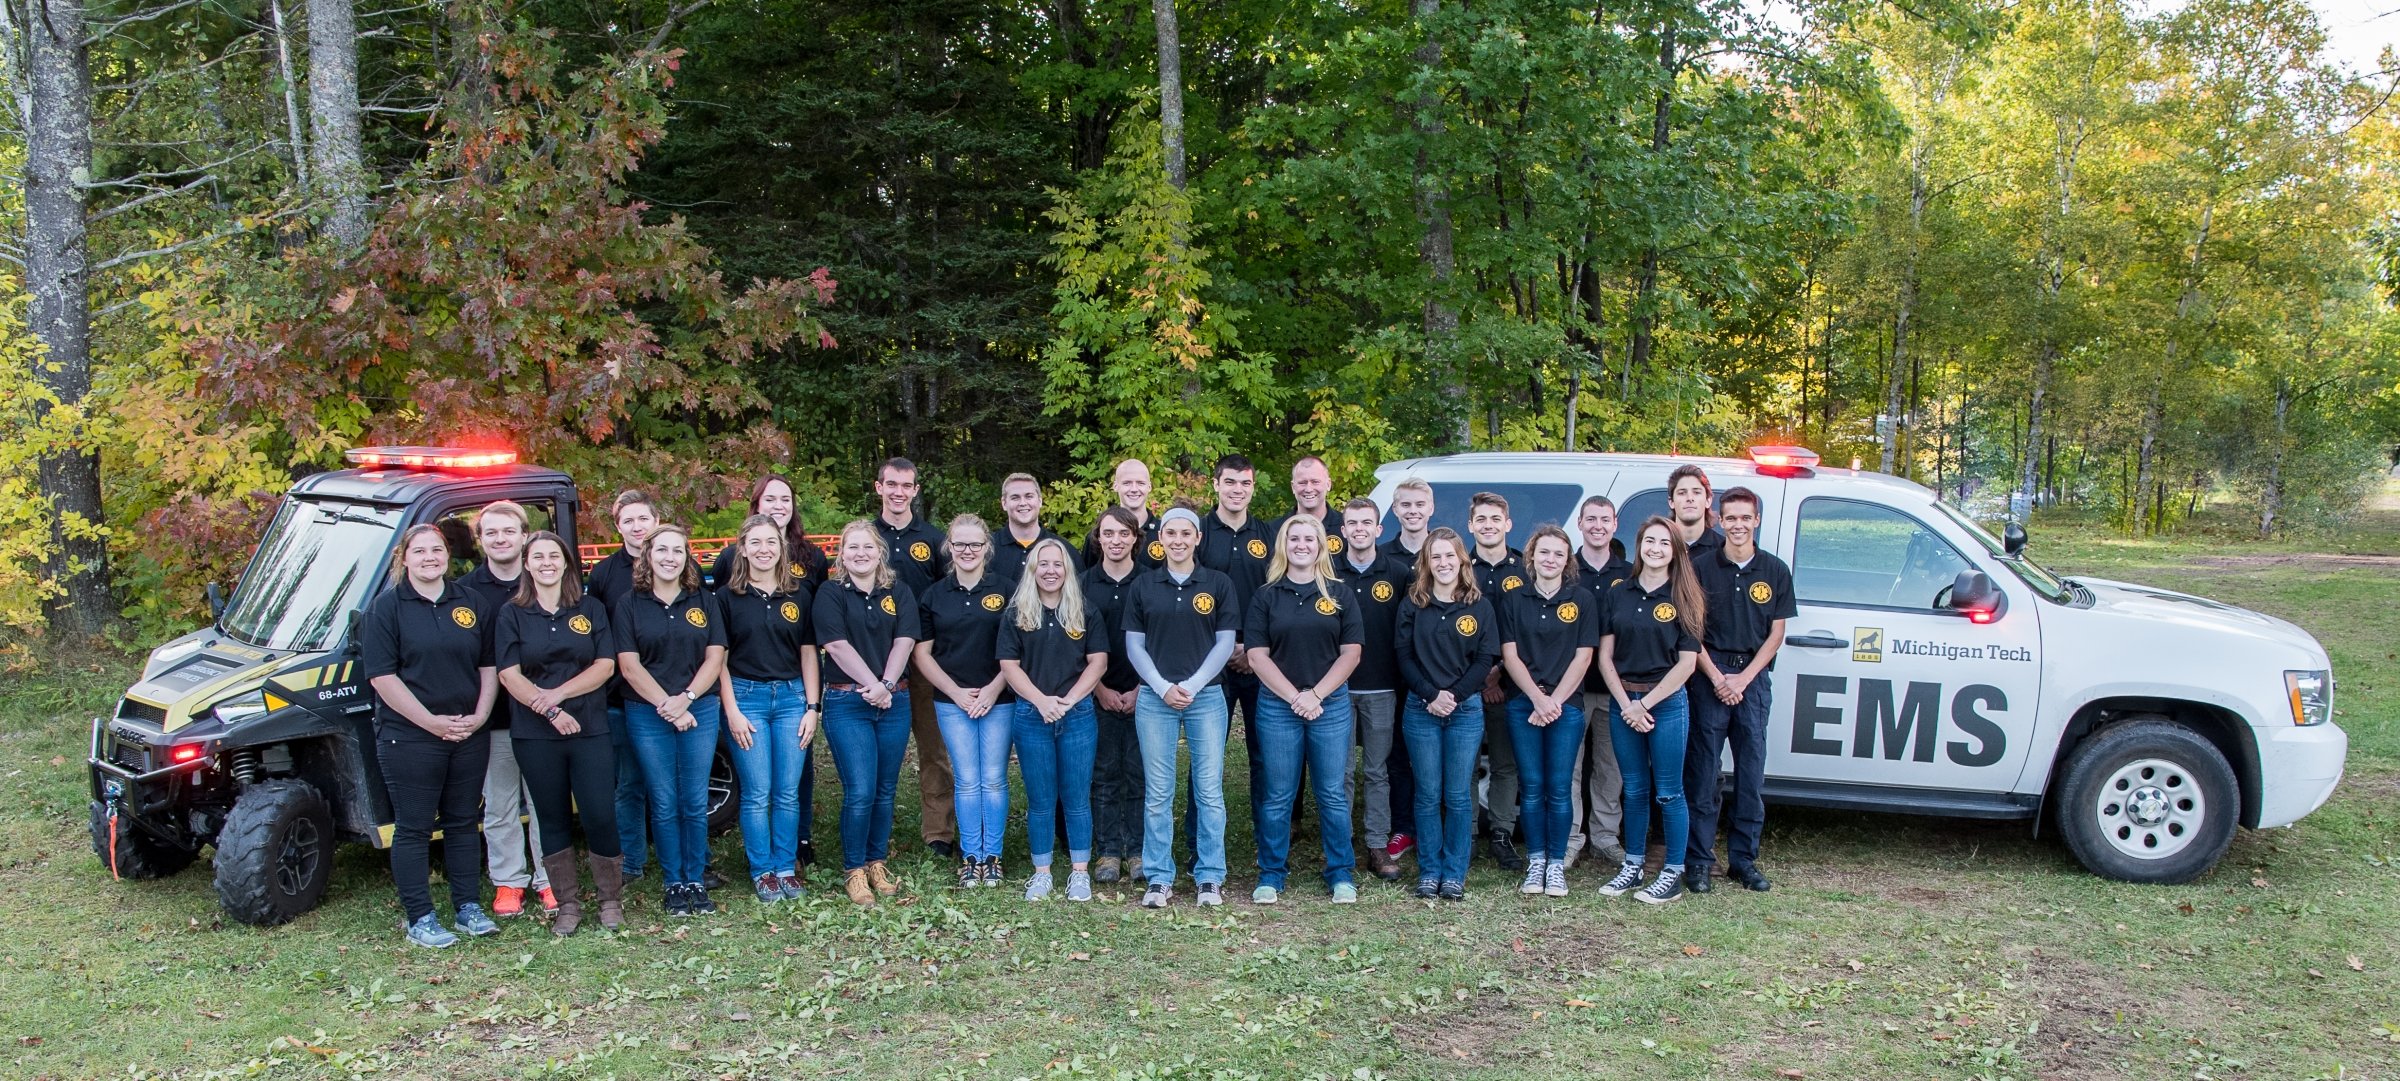 Image of 27 members of Michigan Tech's emergency medical technician team standing in front of their vehicles